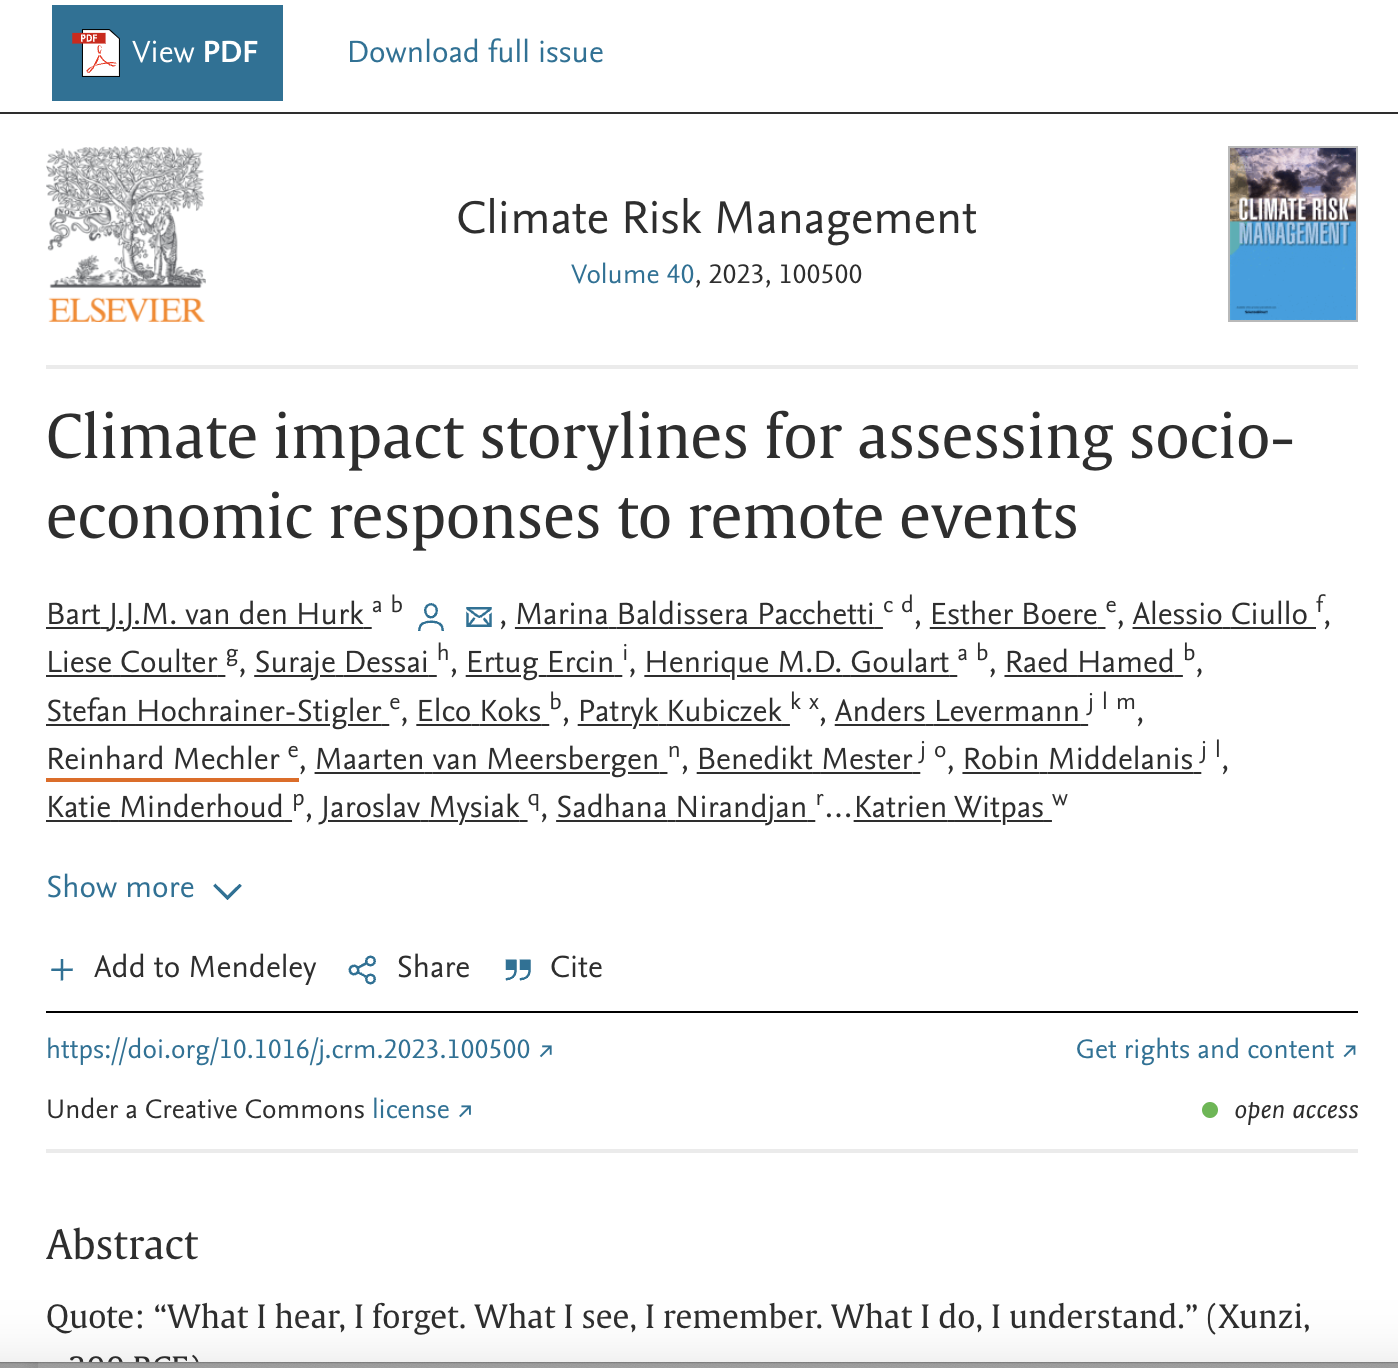 WP1 Project management- Climate impact storylines for assessing socio-economic responses to remote events